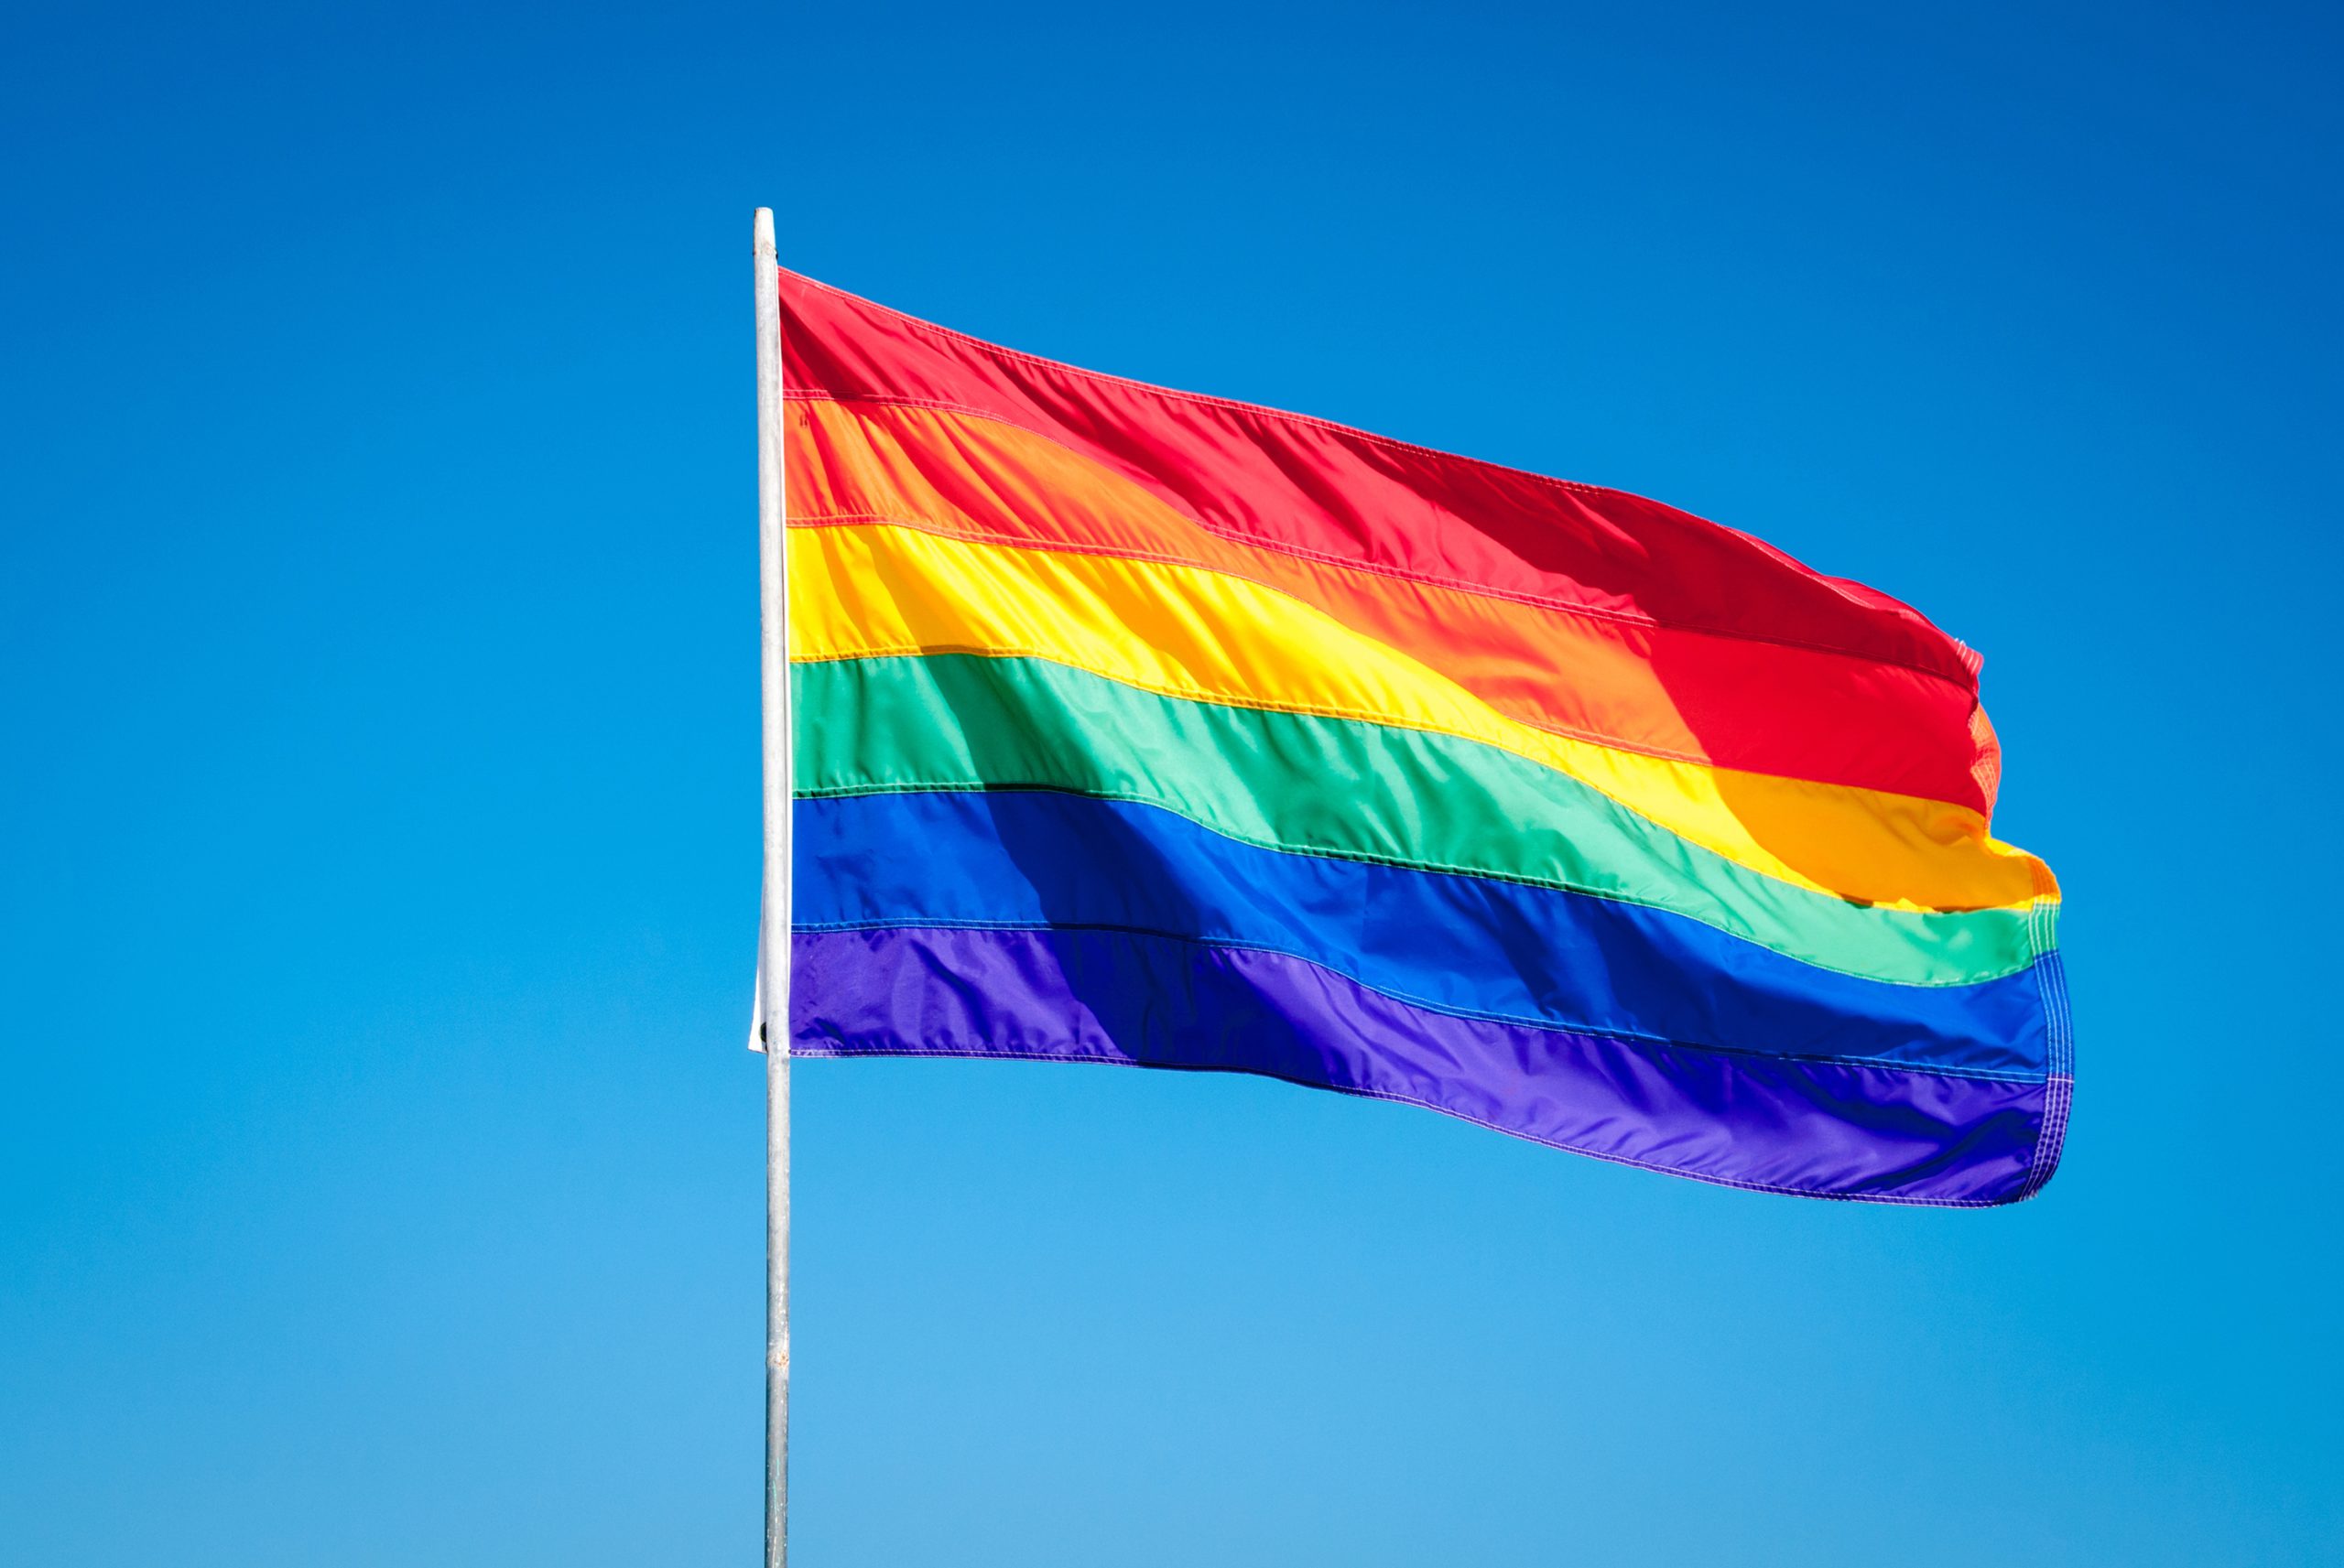 The Gay Pride flag flies in Miami. Disneyland will hold its first officially sanctioned Pride Nite as an after-hours ticketed event this summer. (Alexander Demyanenko/Dreamstime/TNS)